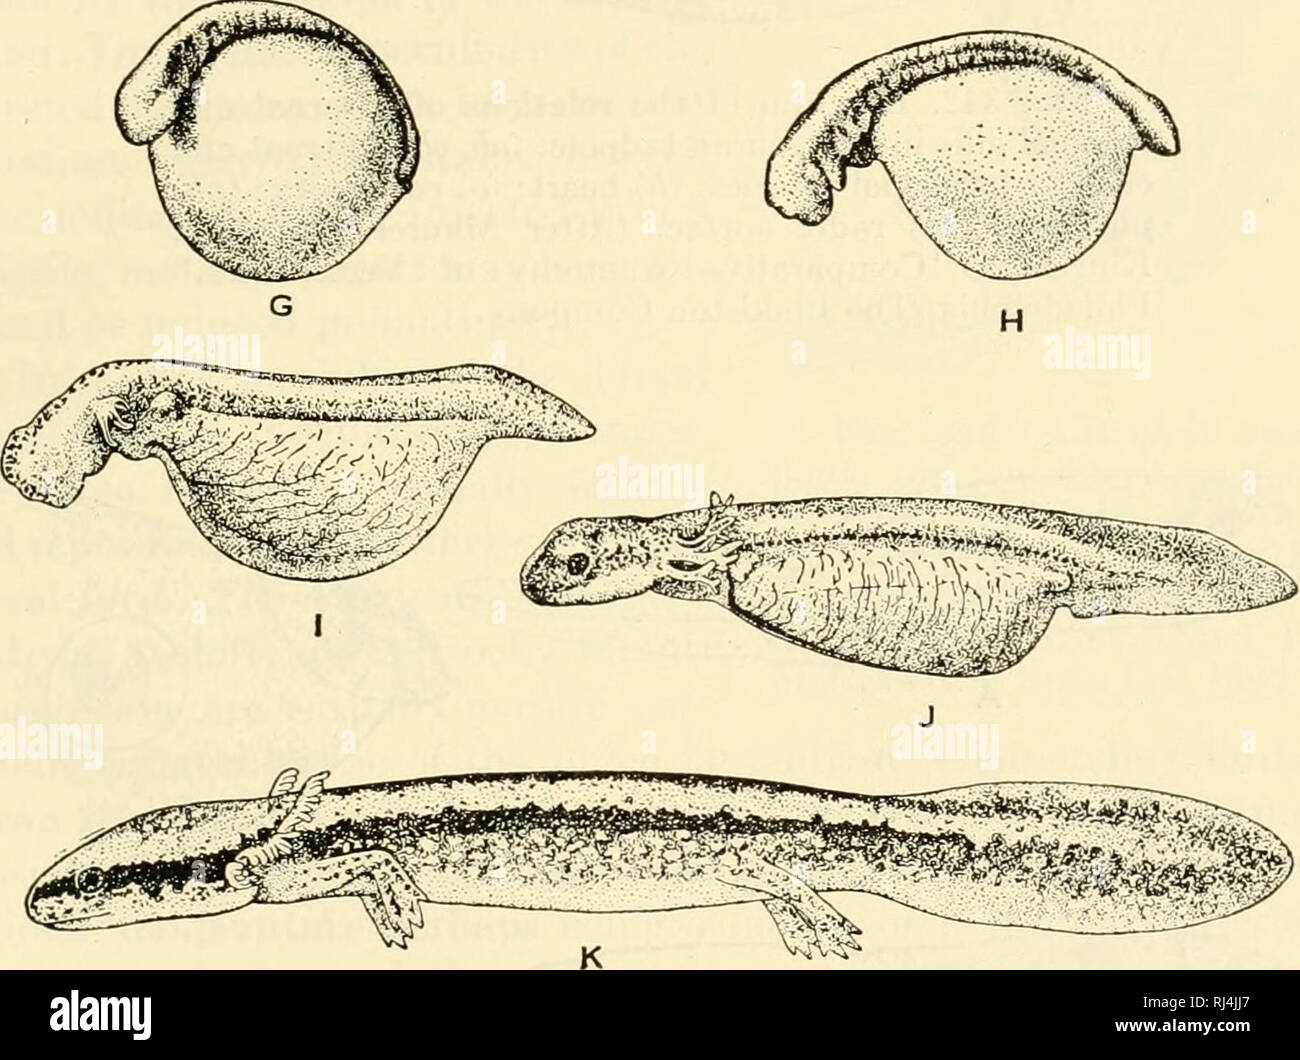 . The chordates. Chordata. Fig. 341. The development of Necturus maculosus. (A) Side view of egg 1 day and 8 hours after deposition, showing second and third cleavage grooves. (B) Bot- tom view of egg 6 days and 16 hours old. The crescentic blastoporal fold sharply separates the large yolk-cells from the small cells of the blastodisk. (C) Bottom view of egg 10 days and 10 hours old, showing large circular blastopore. (D) Top view of egg 14 days and 4 hours old. Blastopore narrow. Beginning of neural-fold formation, especially prominent anteriorly. (E) Top view of egg 15 days and 15 hours old.  Stock Photo